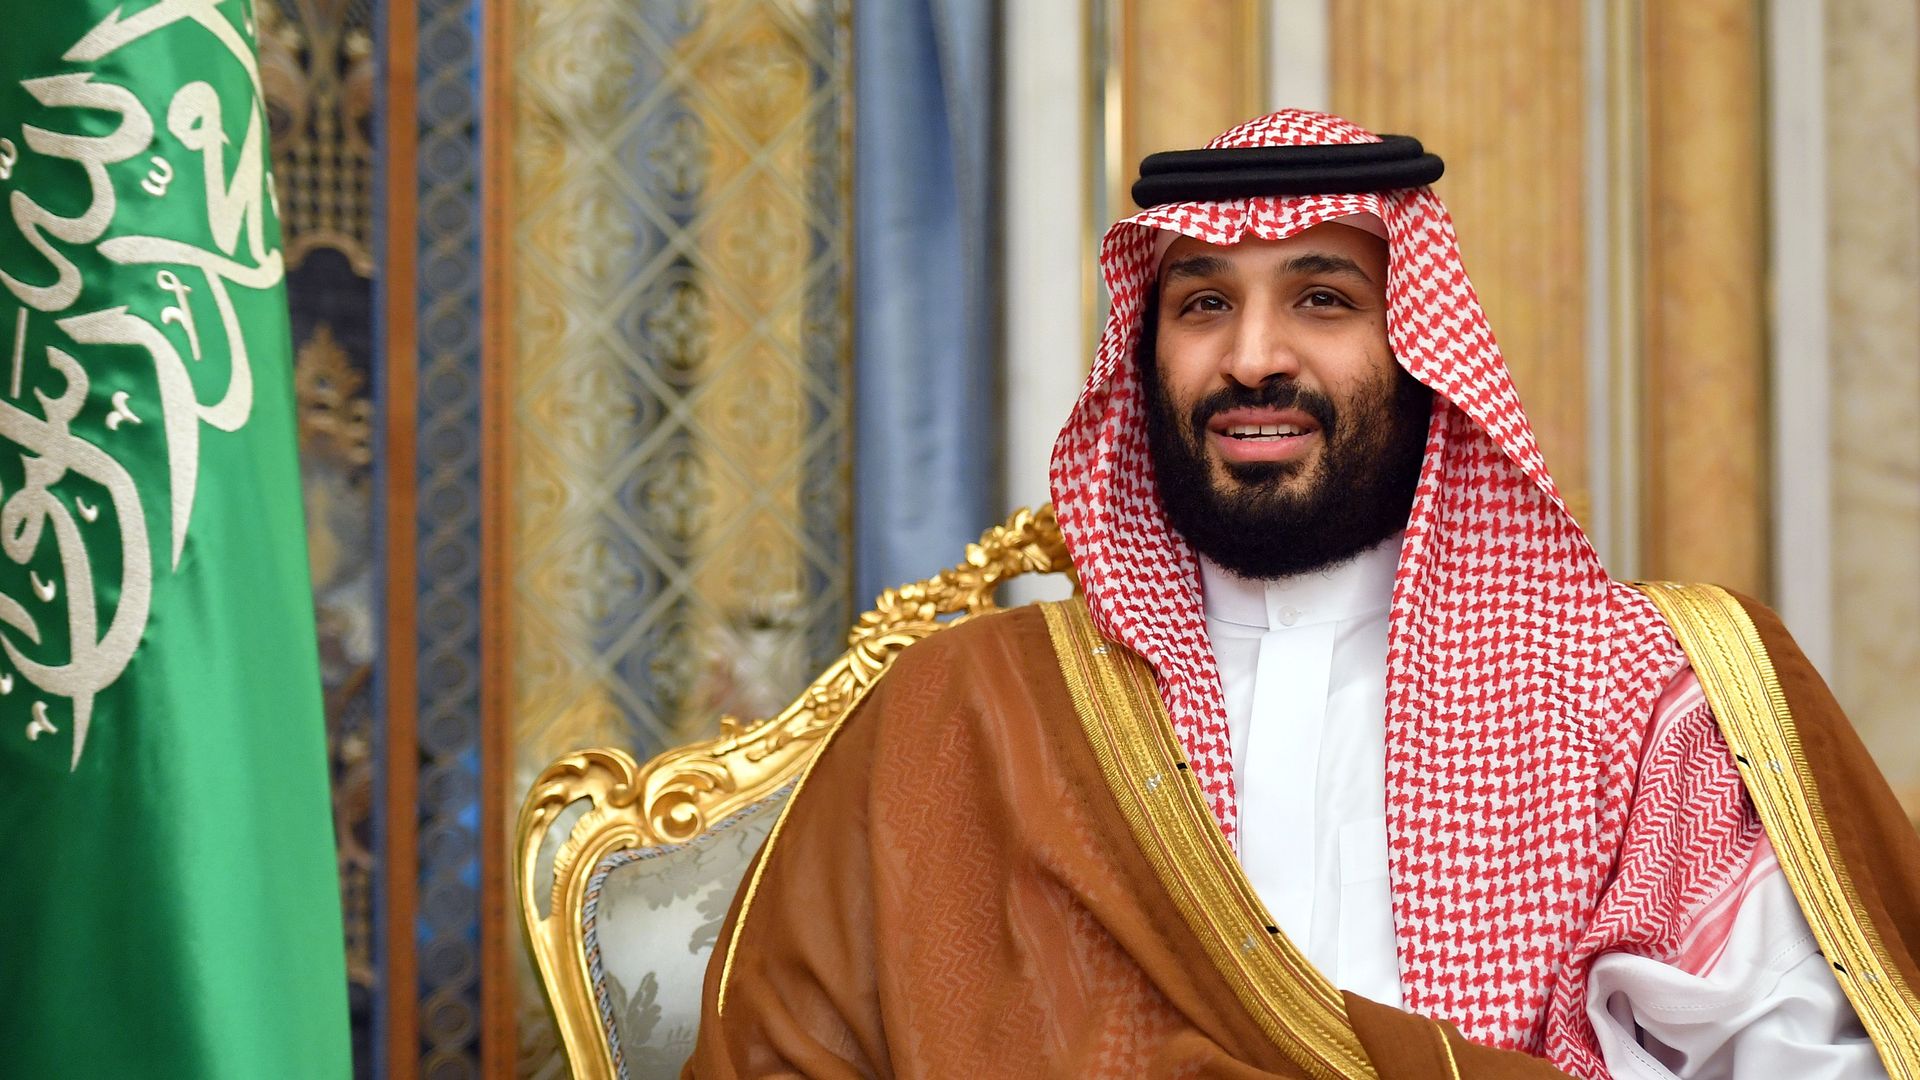 Saudi Arabia's Crown Prince Mohammed bin Salman attends a meeting with the US secretary of state in Jeddah, Saudi Arabia, on September 18